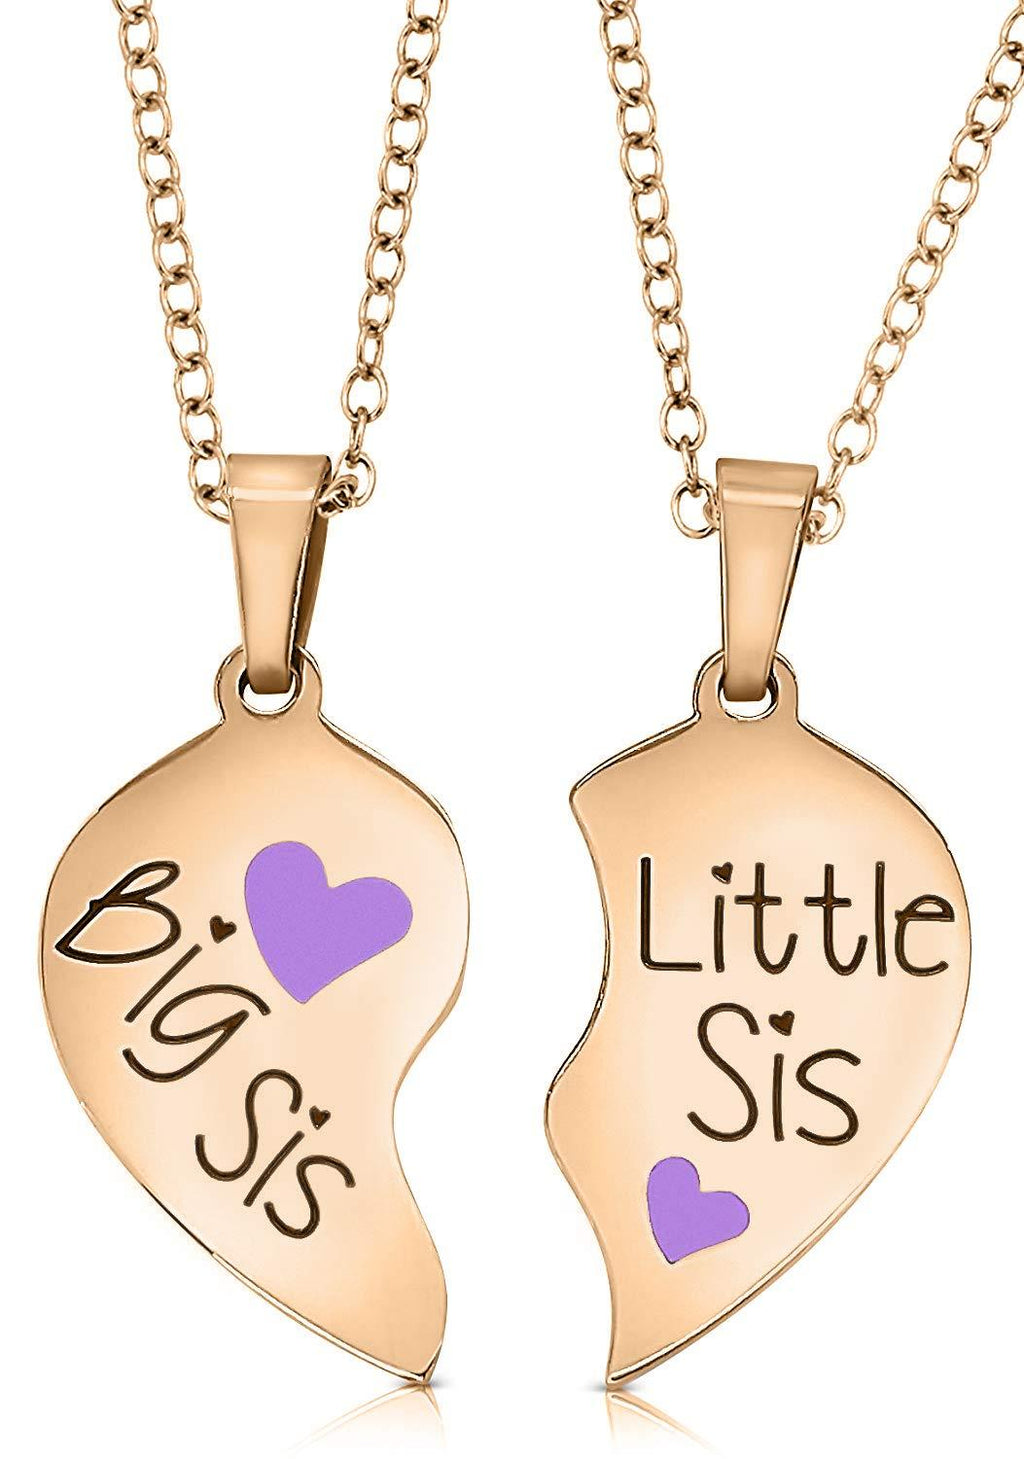 [Australia] - Big Sis & Lil Sis Gifts Jewelry Heart Necklace Set, 2 Sister Necklaces, Big & Little Sisters Jewelry Rose Gold/Purple Hearts 